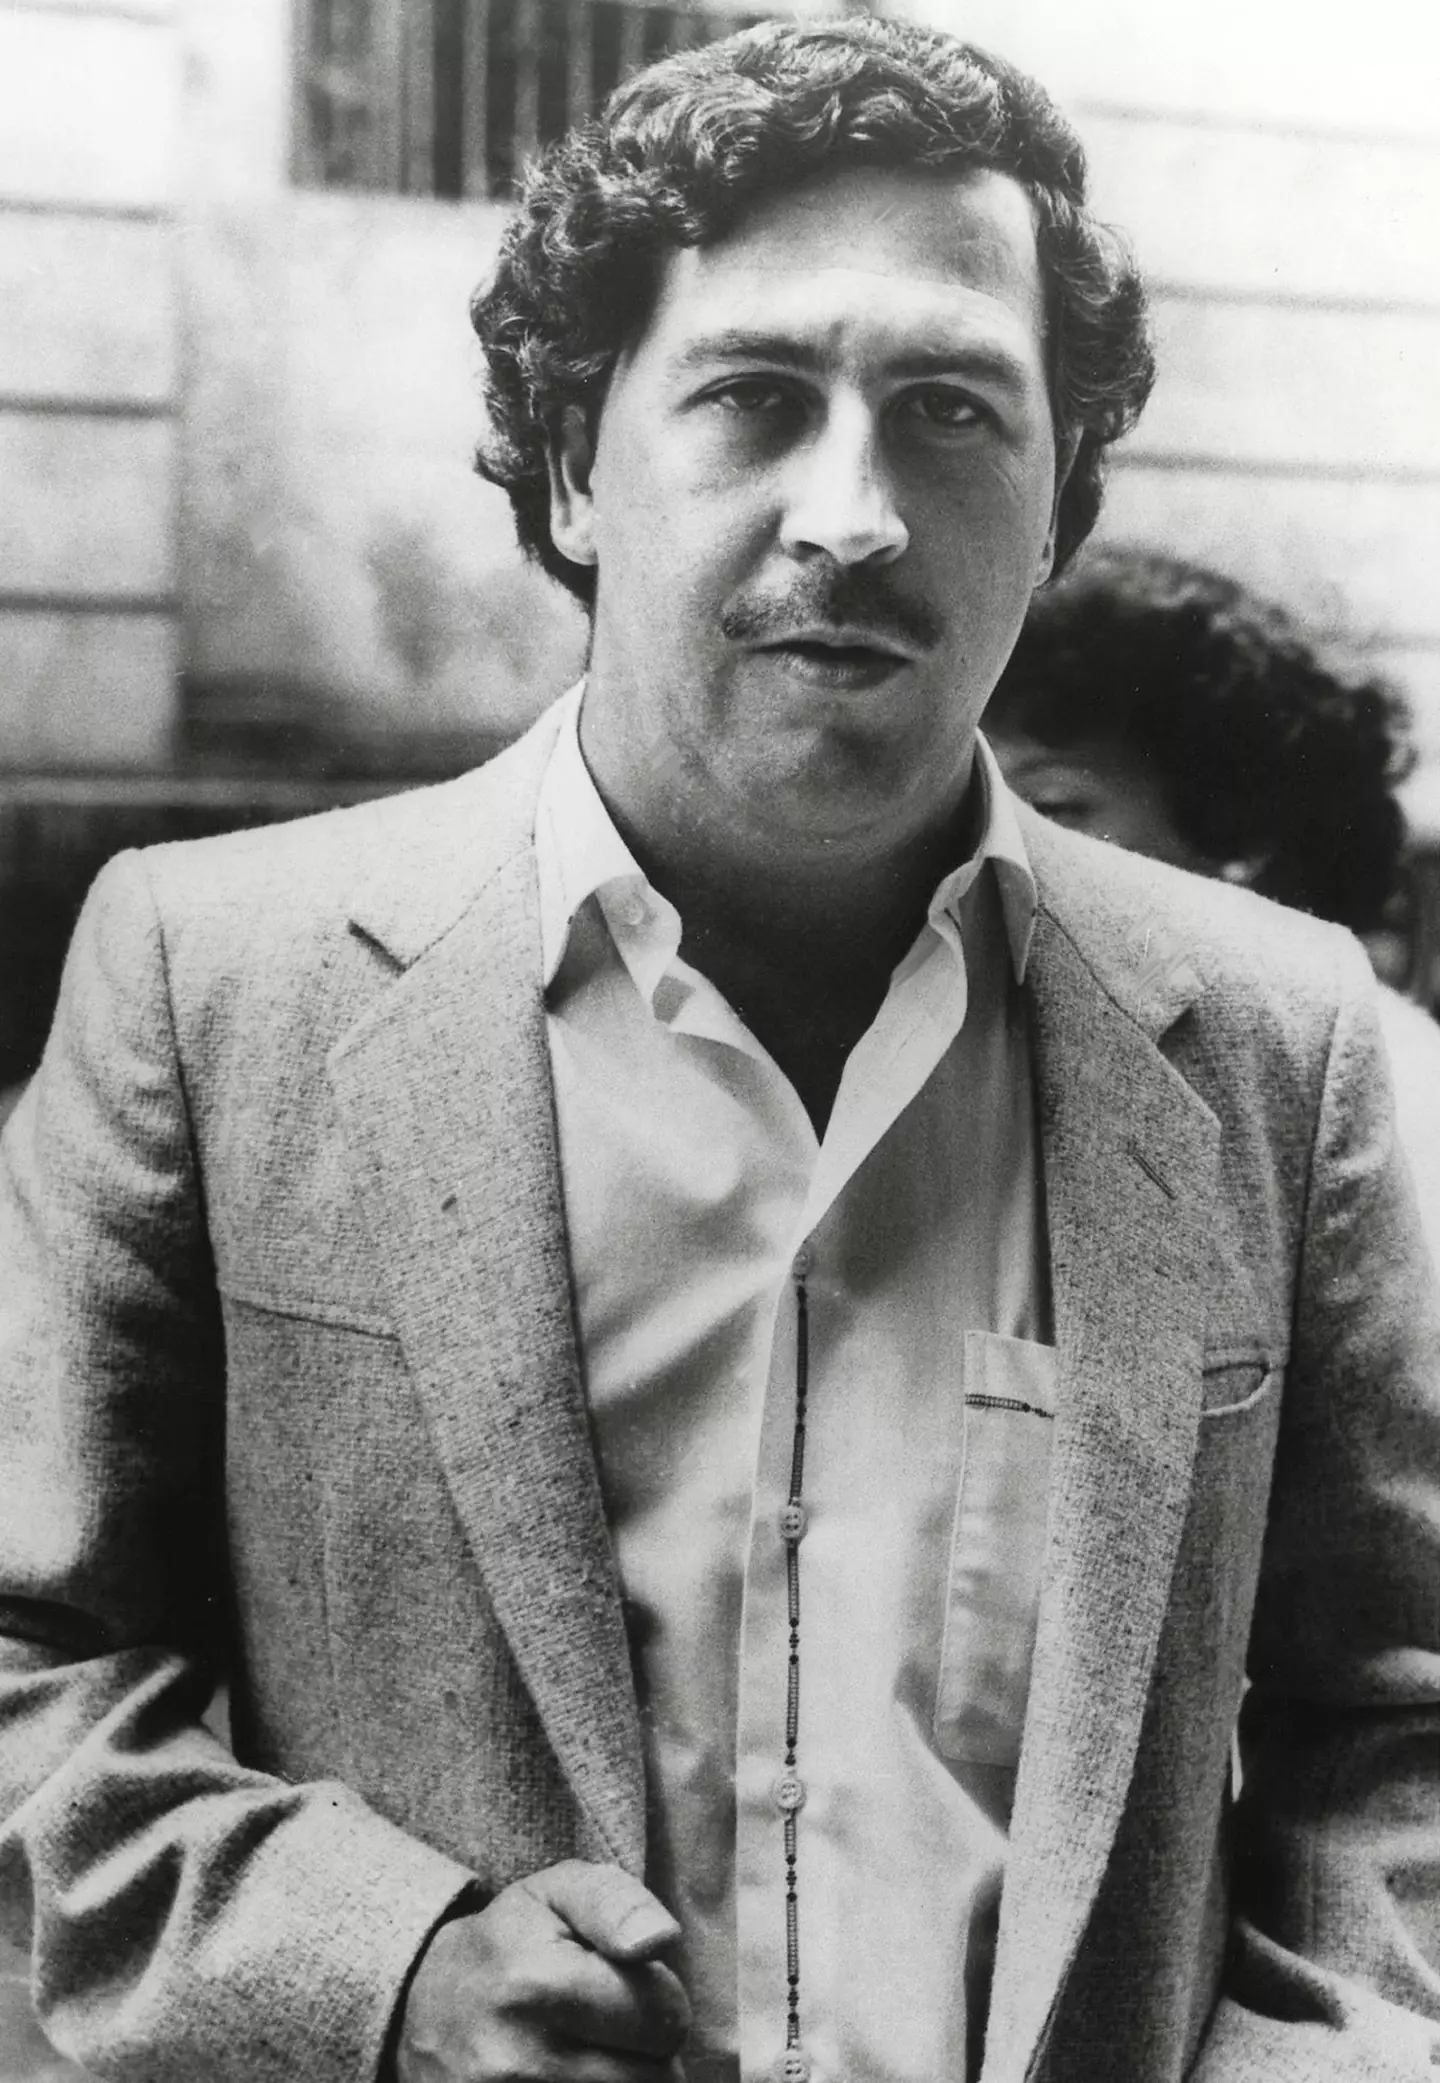 Escobar is thought to be responsible for the deaths of thousands of people during his reign of terror.